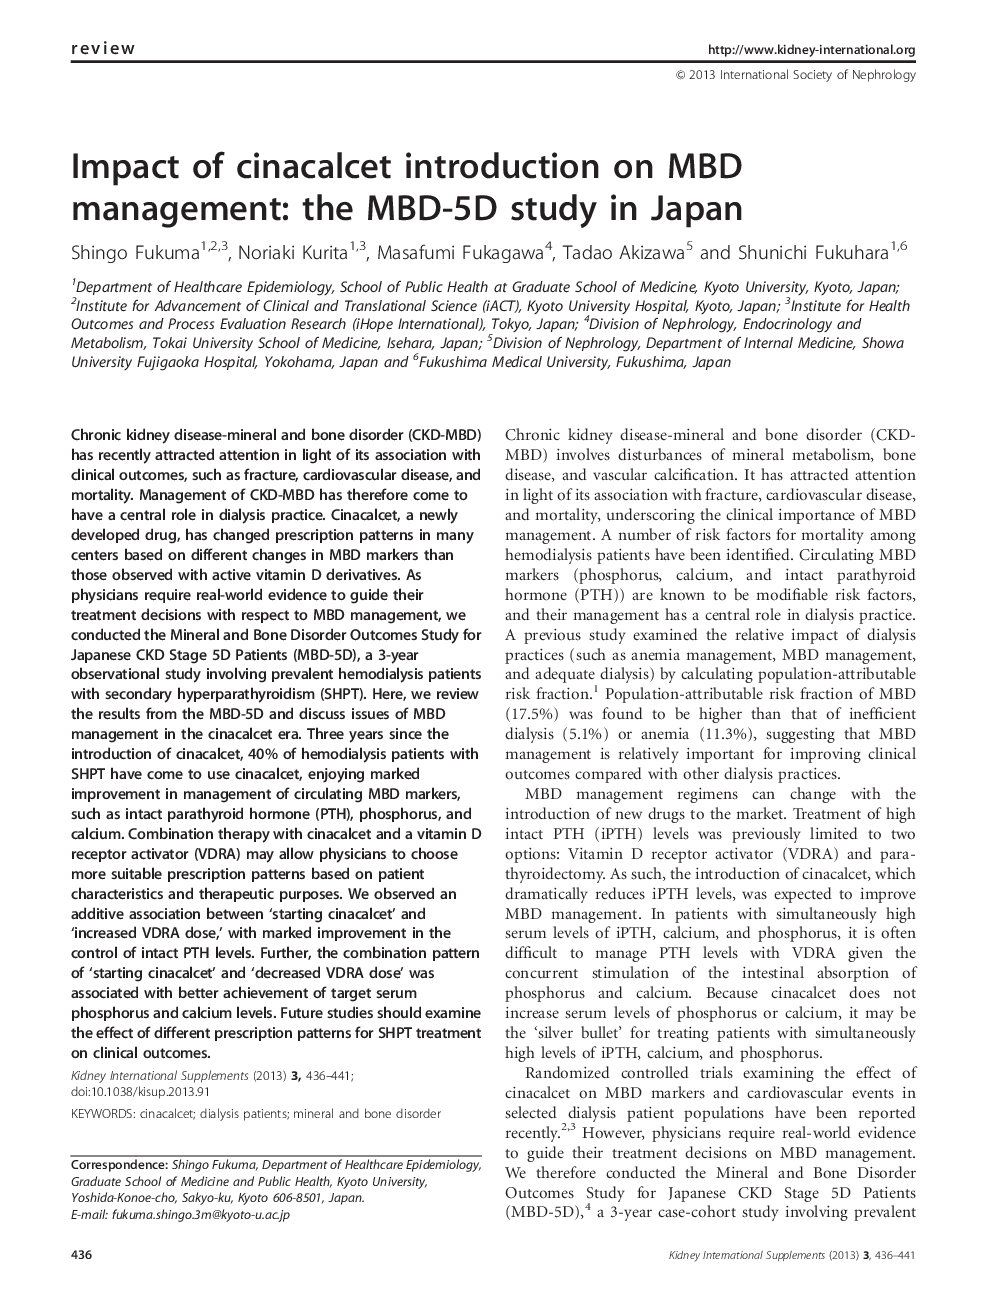 Impact of cinacalcet introduction on MBD management: the MBD-5D study in Japan